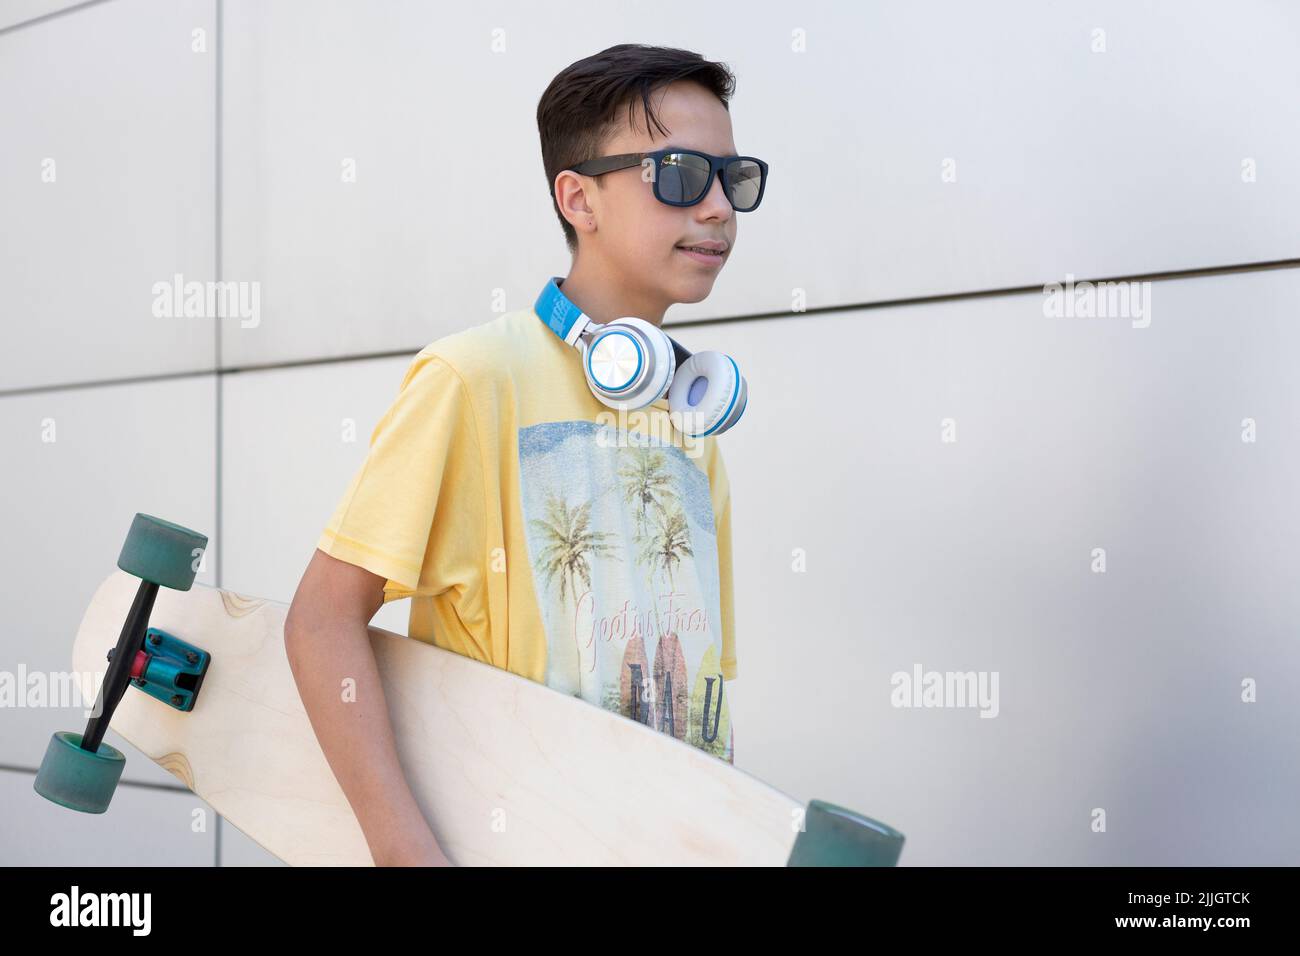 Closeup of caucasian teenage boy with skateboard. He is isolated on a wall. Vacation and urban lifestyle concept. Stock Photo